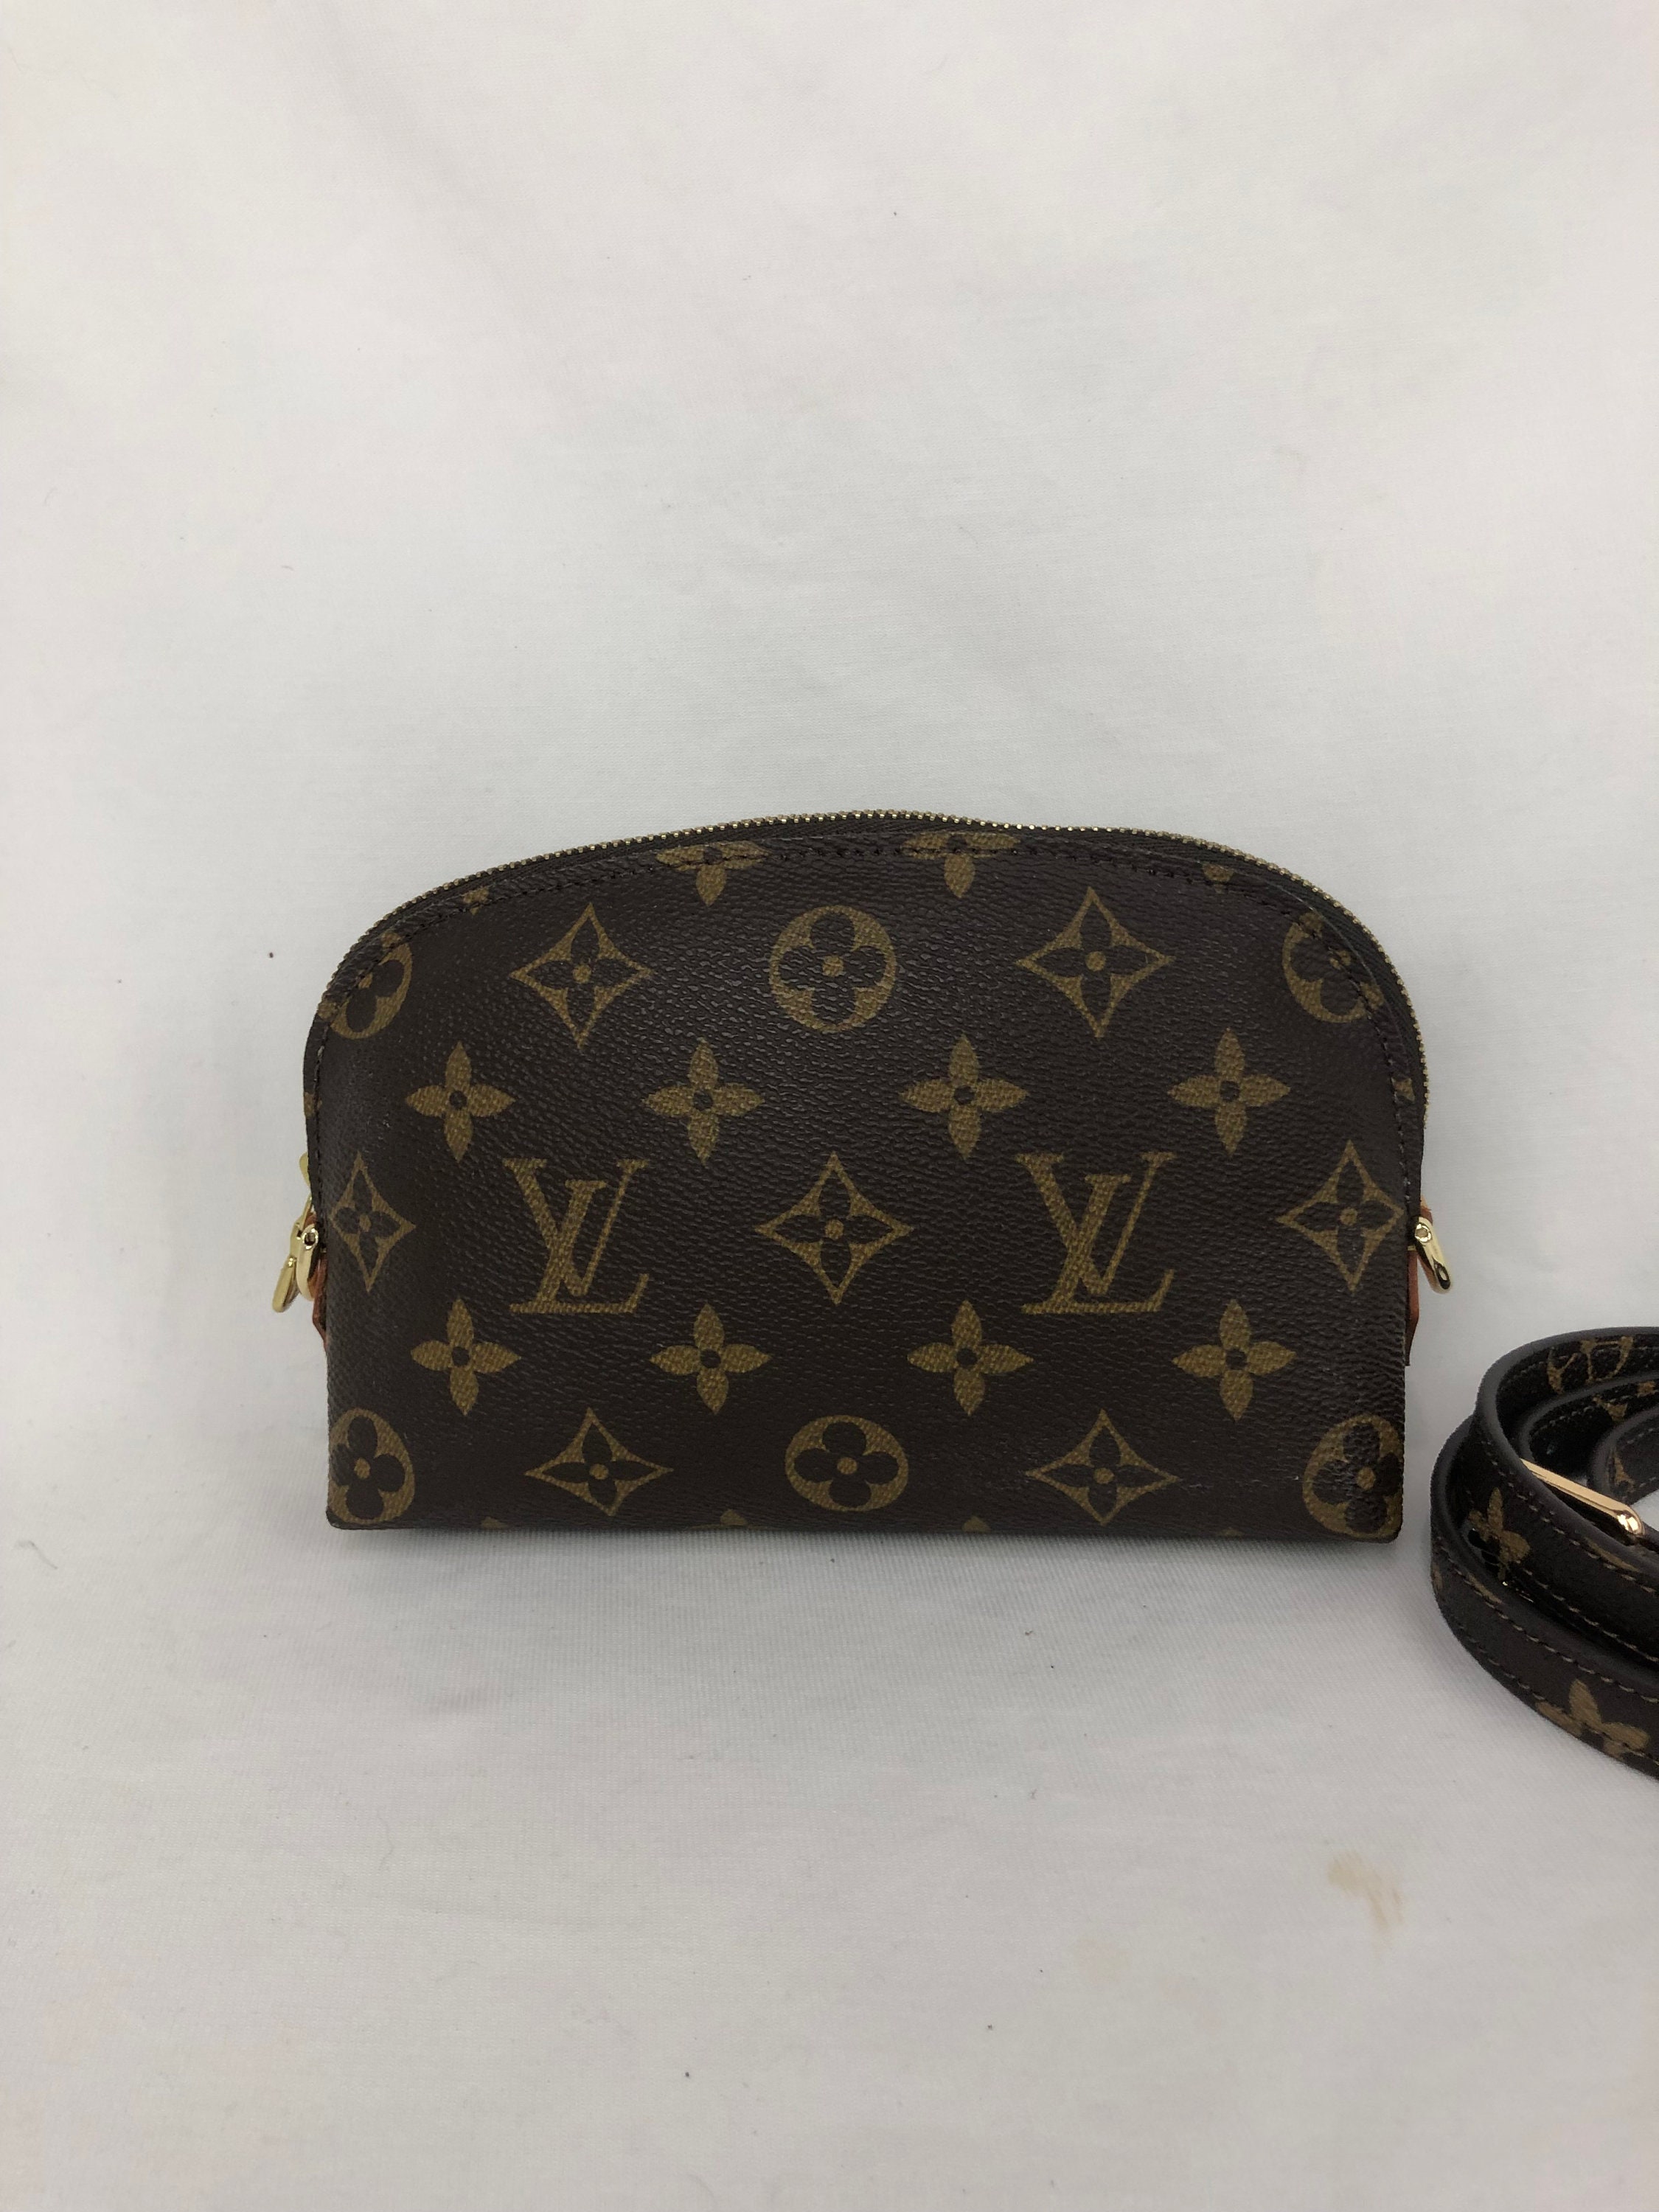 LOUIS VUITTON Cosmetic Pouch Adding Strap Crossbody Bag 